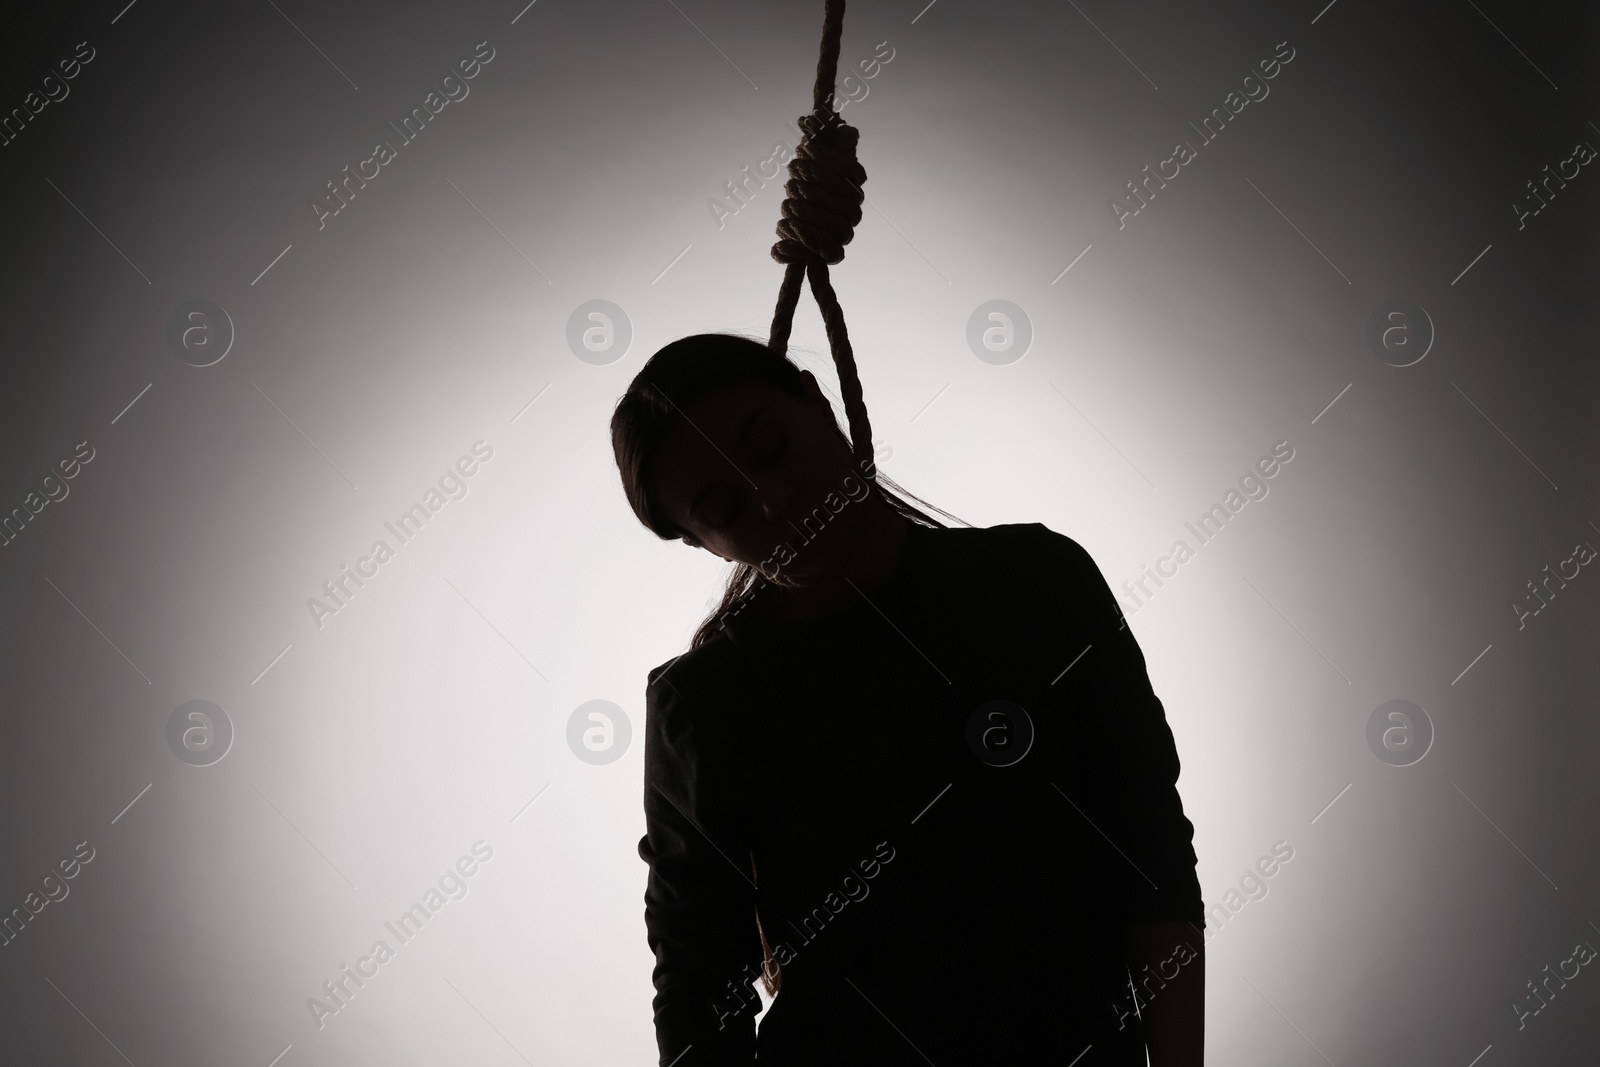 Photo of Silhouette of woman with rope noose on neck against light background